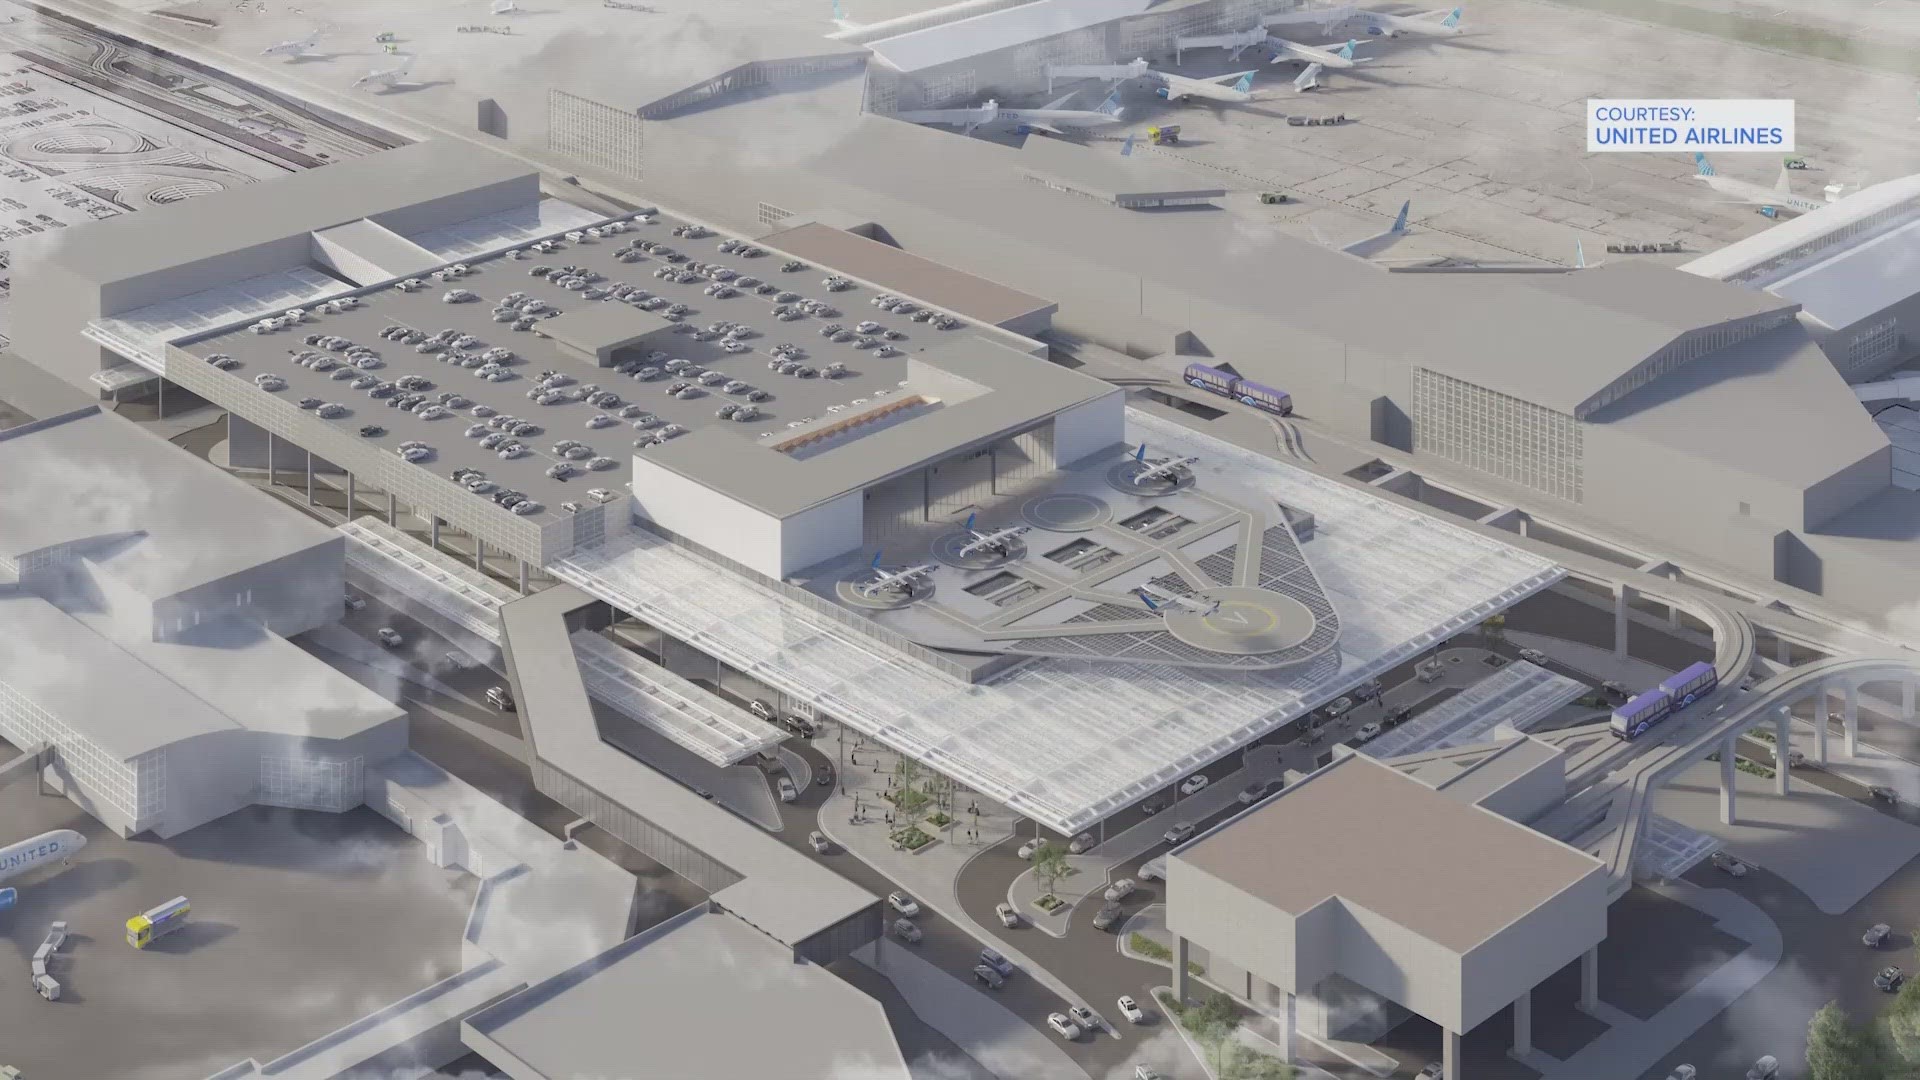 The project includes a state-of-the-art baggage system. The early bag storage facility will be the only one of its kind in the United States.